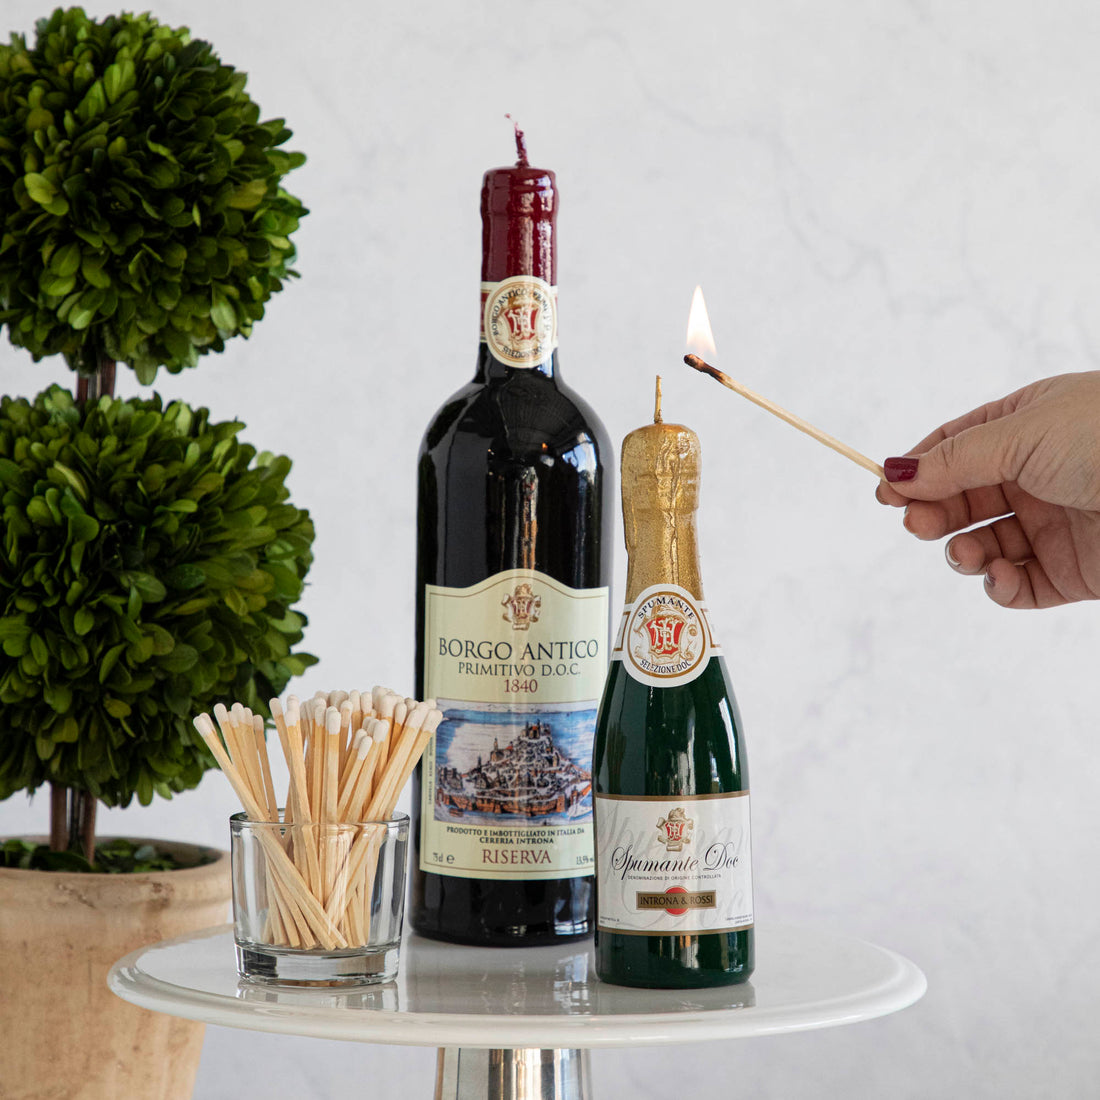 Lighting a high-quality Cereria Introna Spumante Piccola Shaped Candle on a wine bottle with a match, alongside another bottle and matches on a white stand.